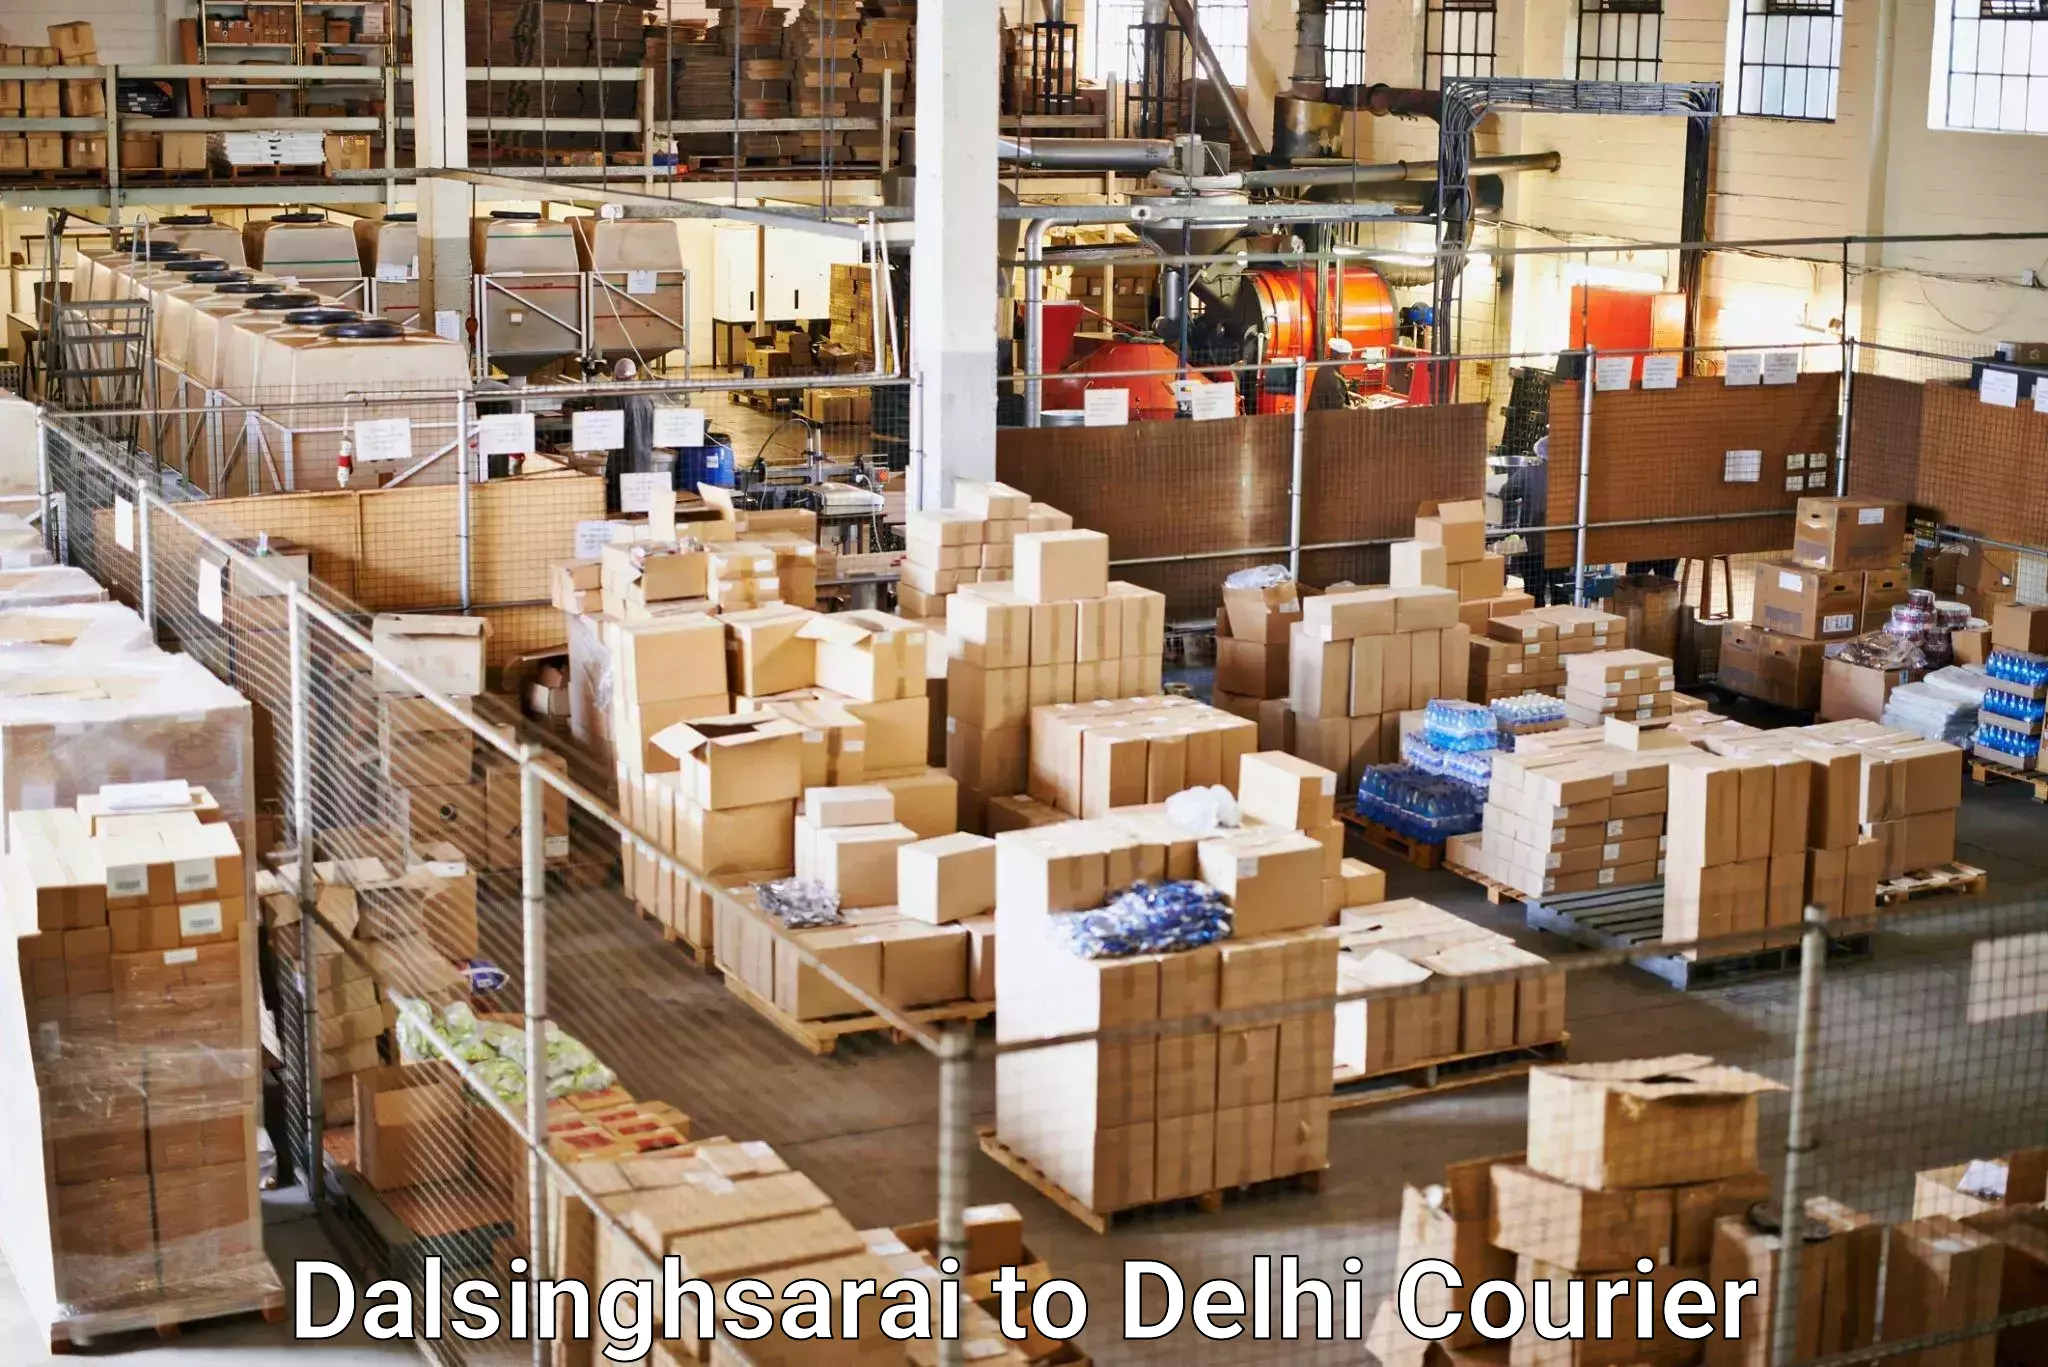 Fast-track shipping solutions Dalsinghsarai to East Delhi